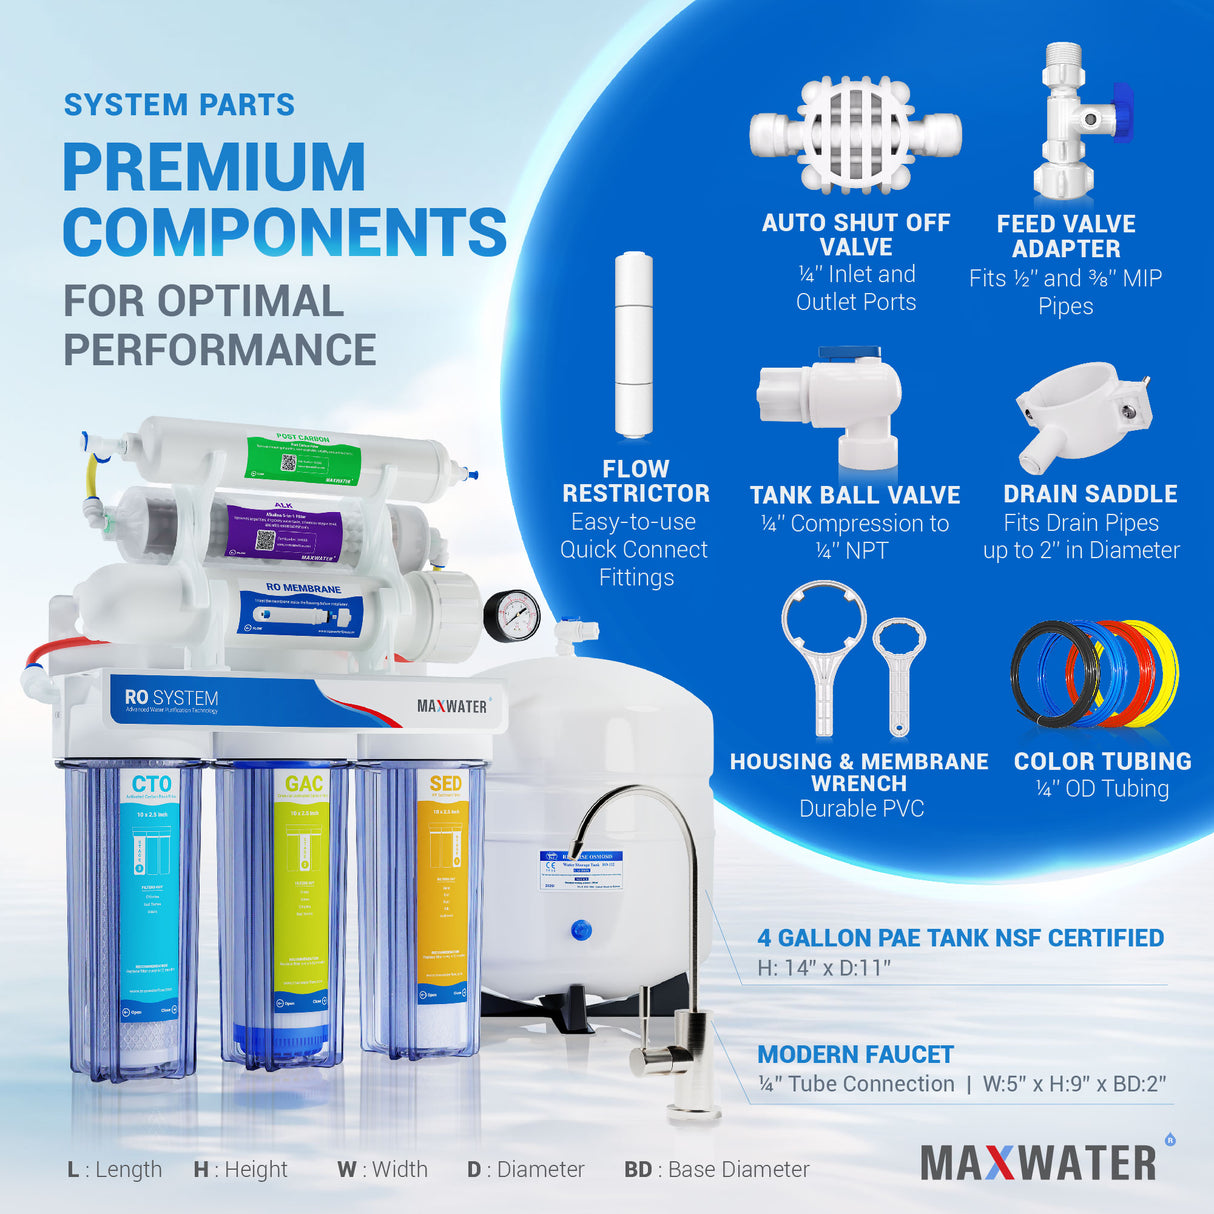 Blue Max Water Reverse Osmosis System for healthy drinking water - alkaline water added minerals and pH+